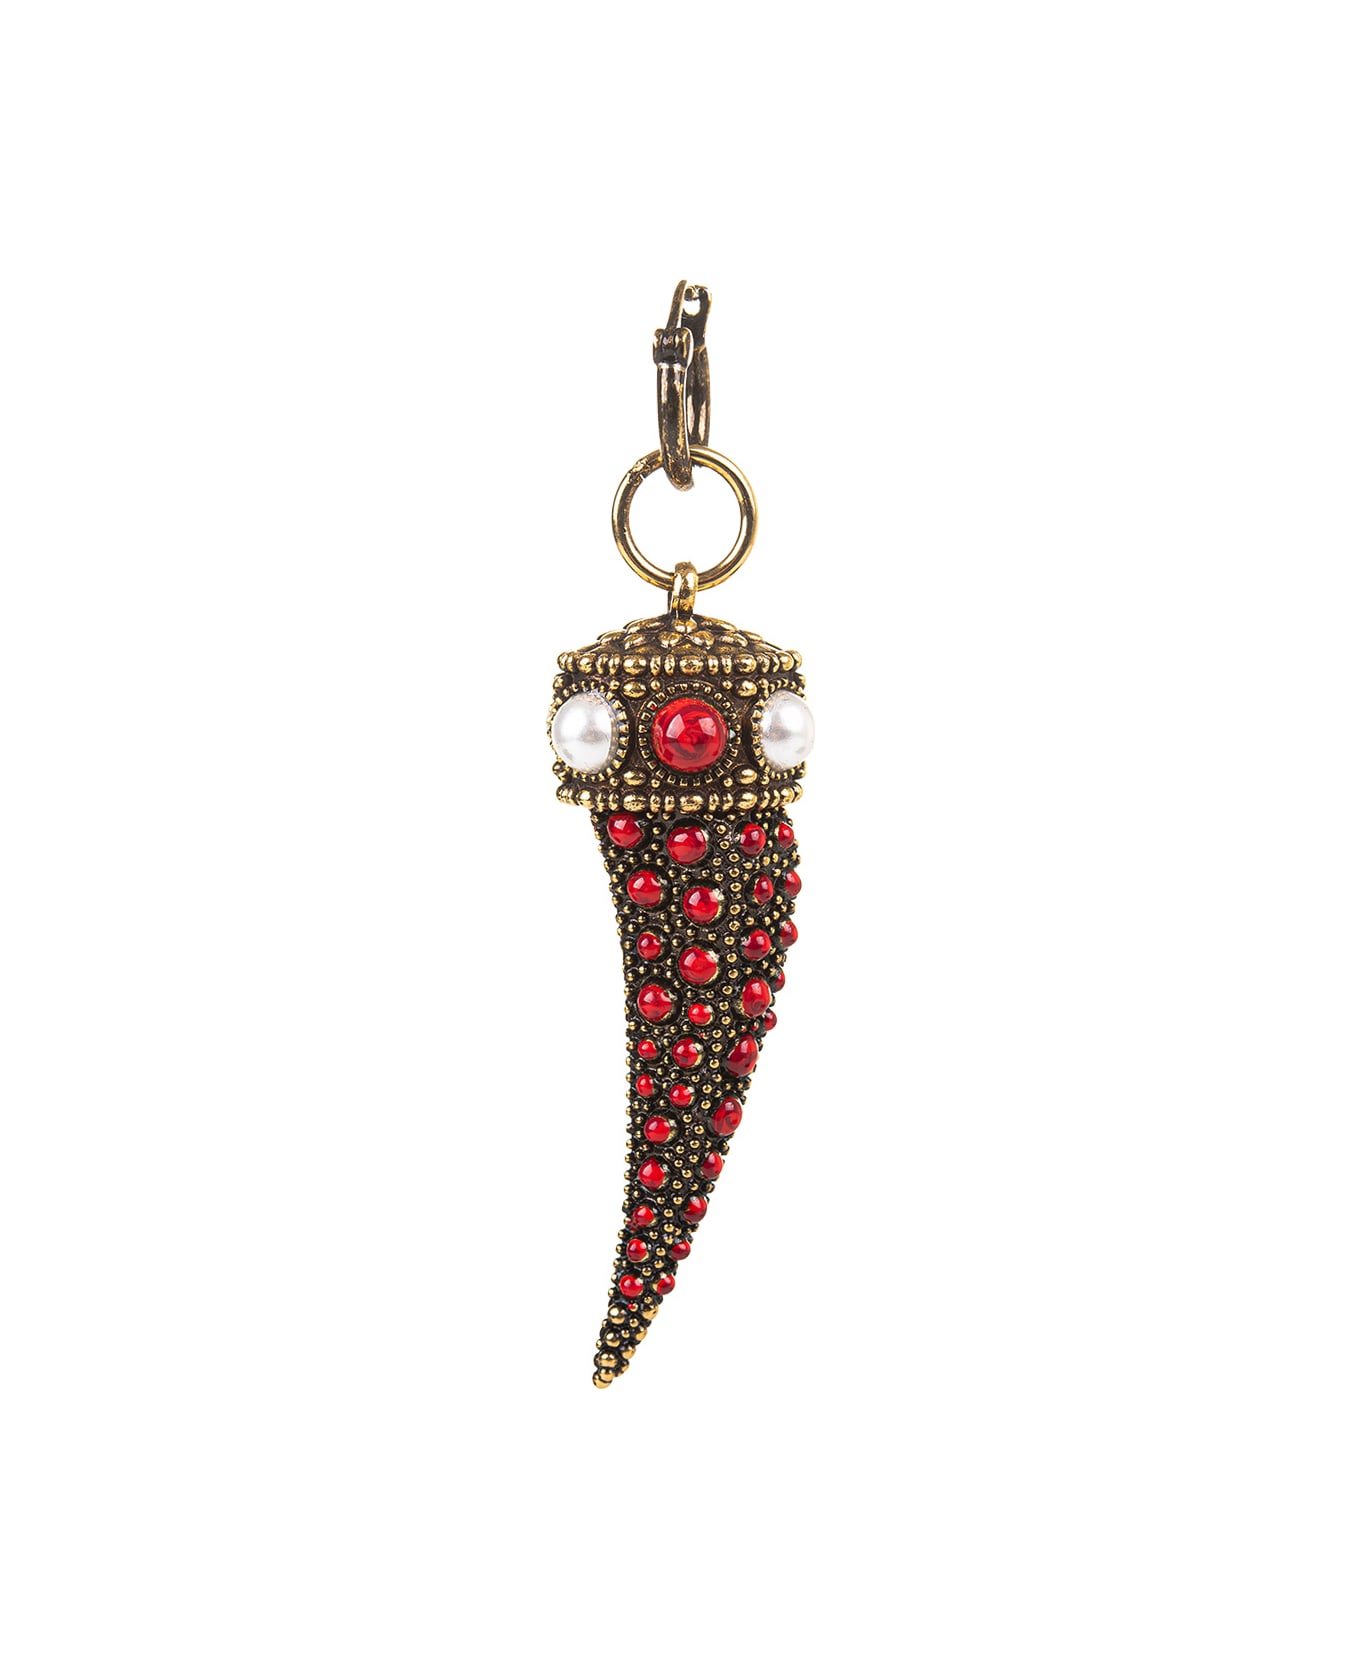 Roberto Cavalli Pendant Earrings With Coral Stones - Gold